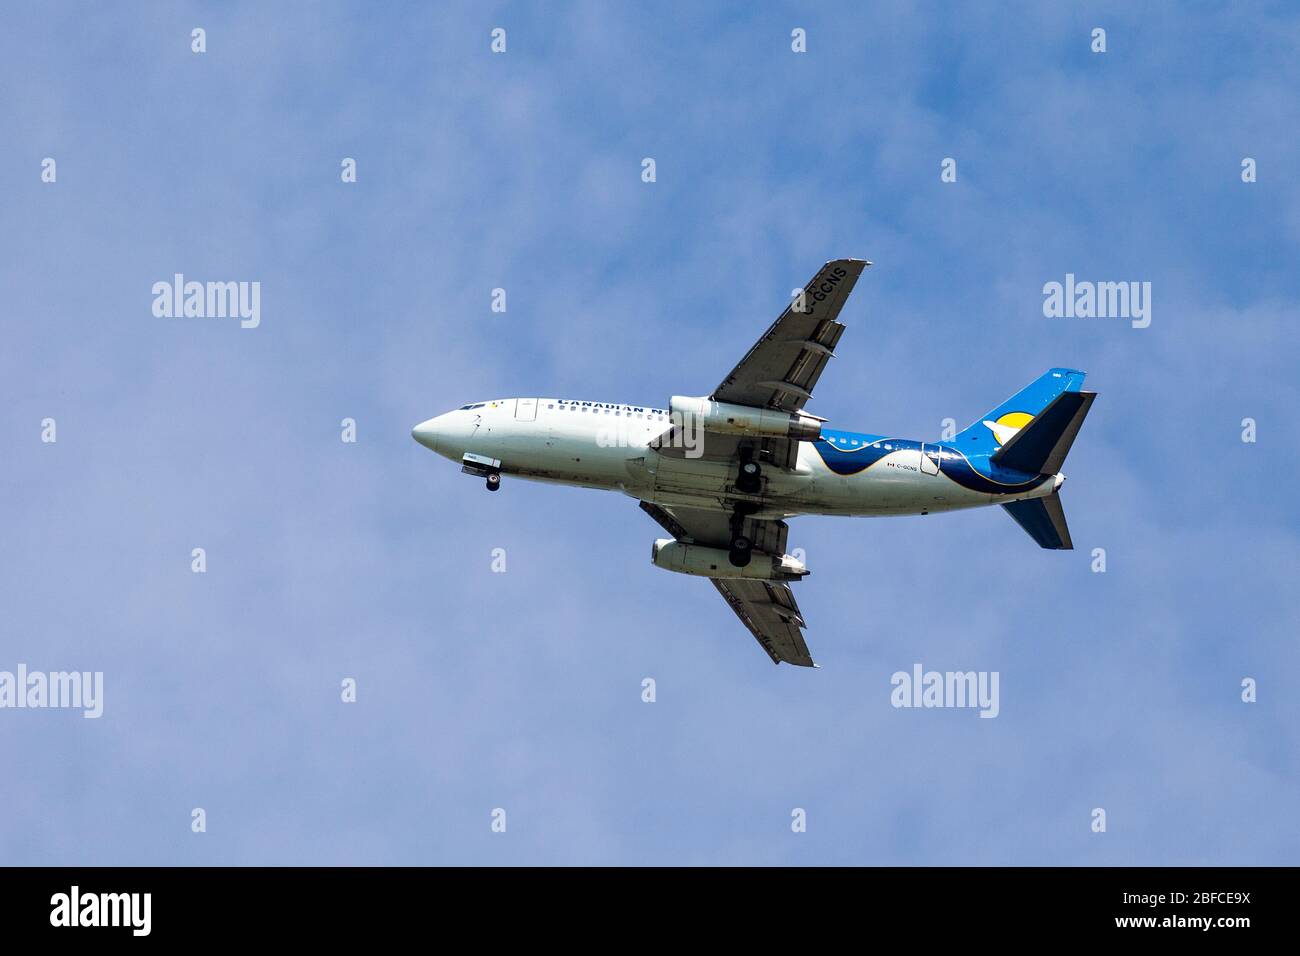 Calgary, Canada - June 30, 2014: Canadian North Airlines  Boeing 737-200 takes off from Calgary International Airport. Wholly Inuit-owned, the airline Stock Photo